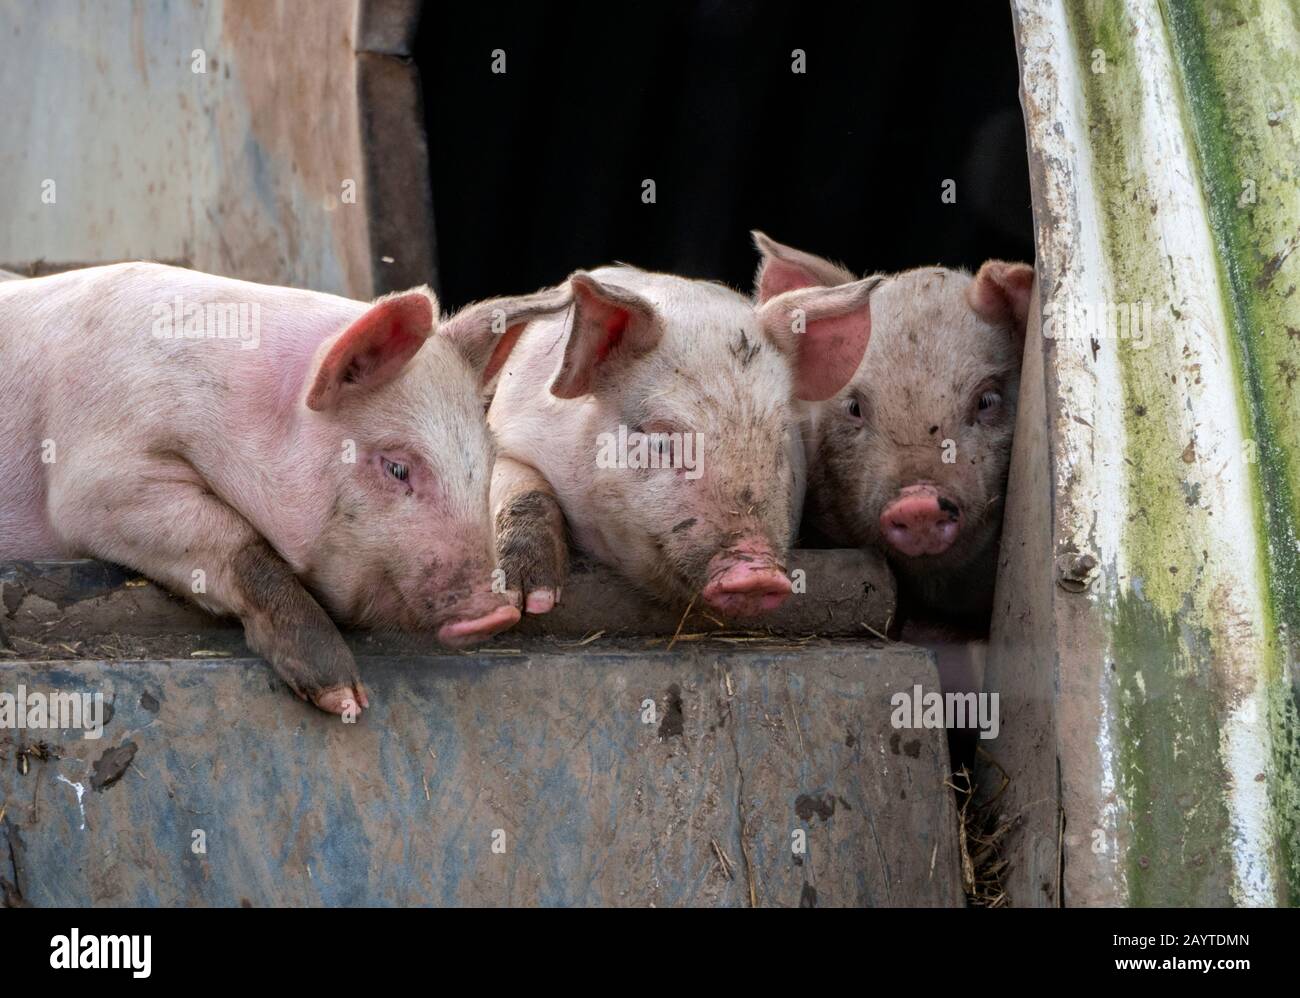 Three little pigs: domestic pigs, which are omnivores, are highly social and intelligent mammals similar, biologically, to humans. Stock Photo